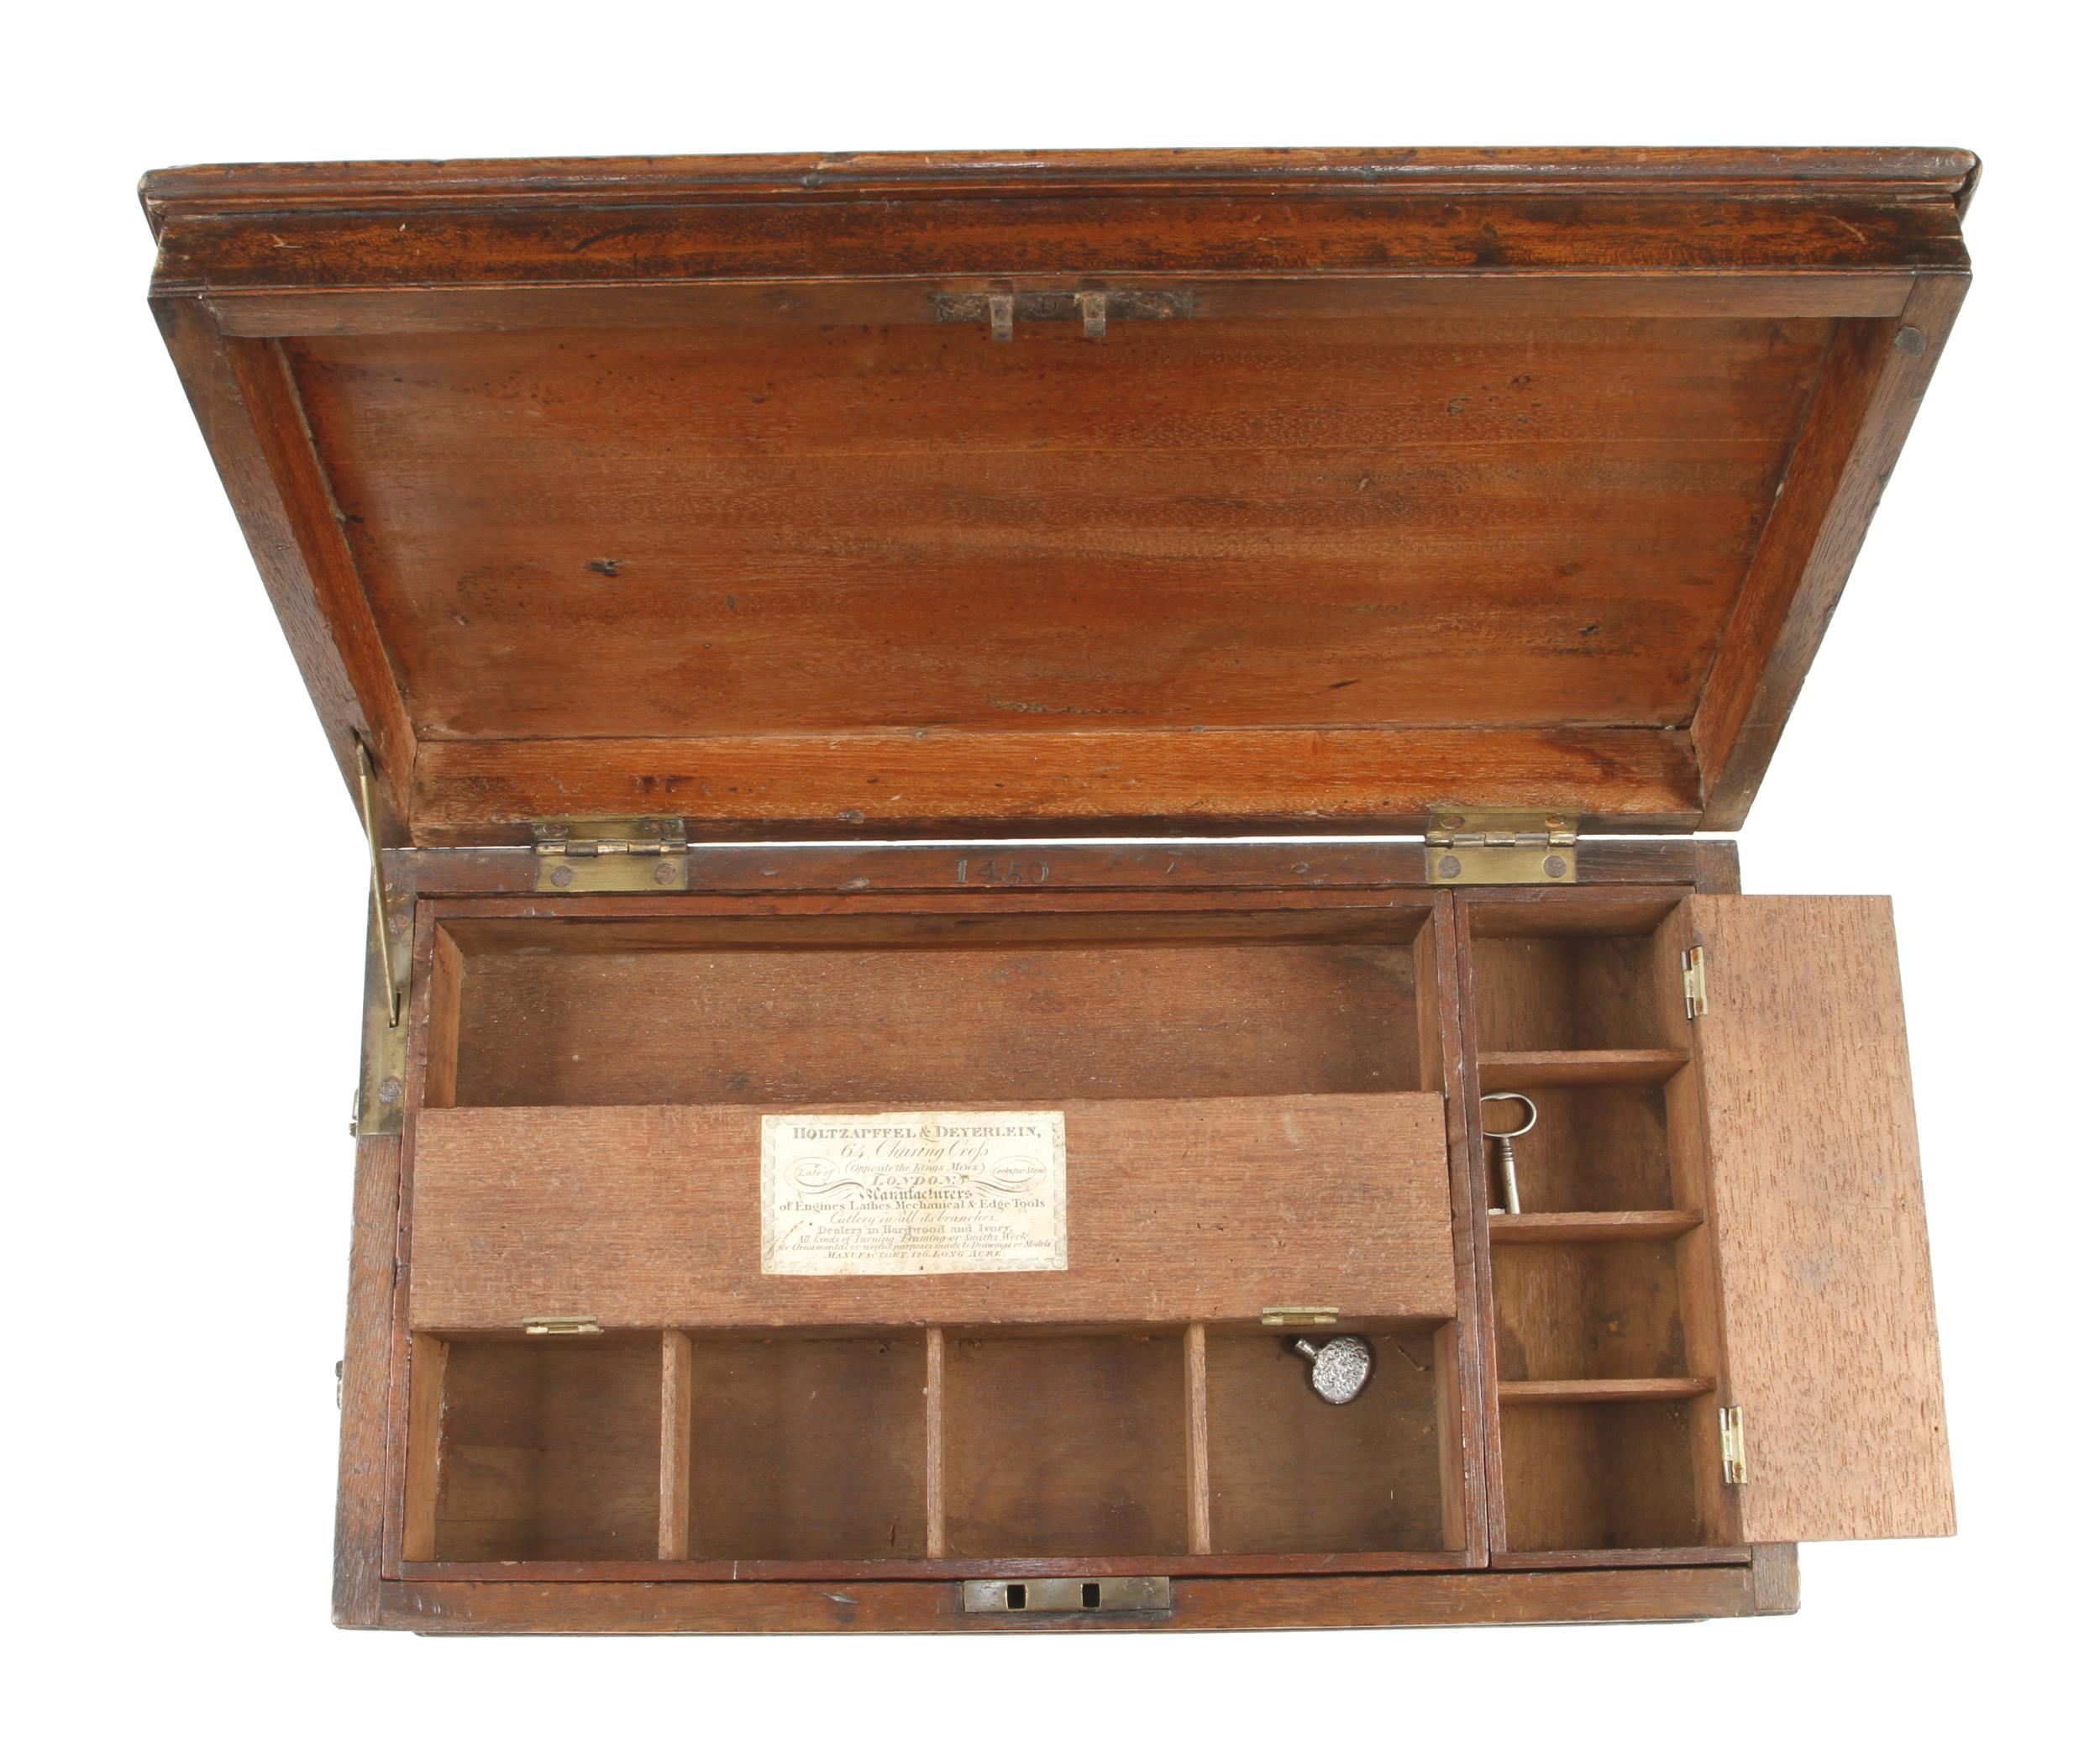 A very rare and fine quality lockable mahogany tool box by HOLTZAPFFEL & DEYERLEIN 14" x 8" x 6"h - Image 4 of 5